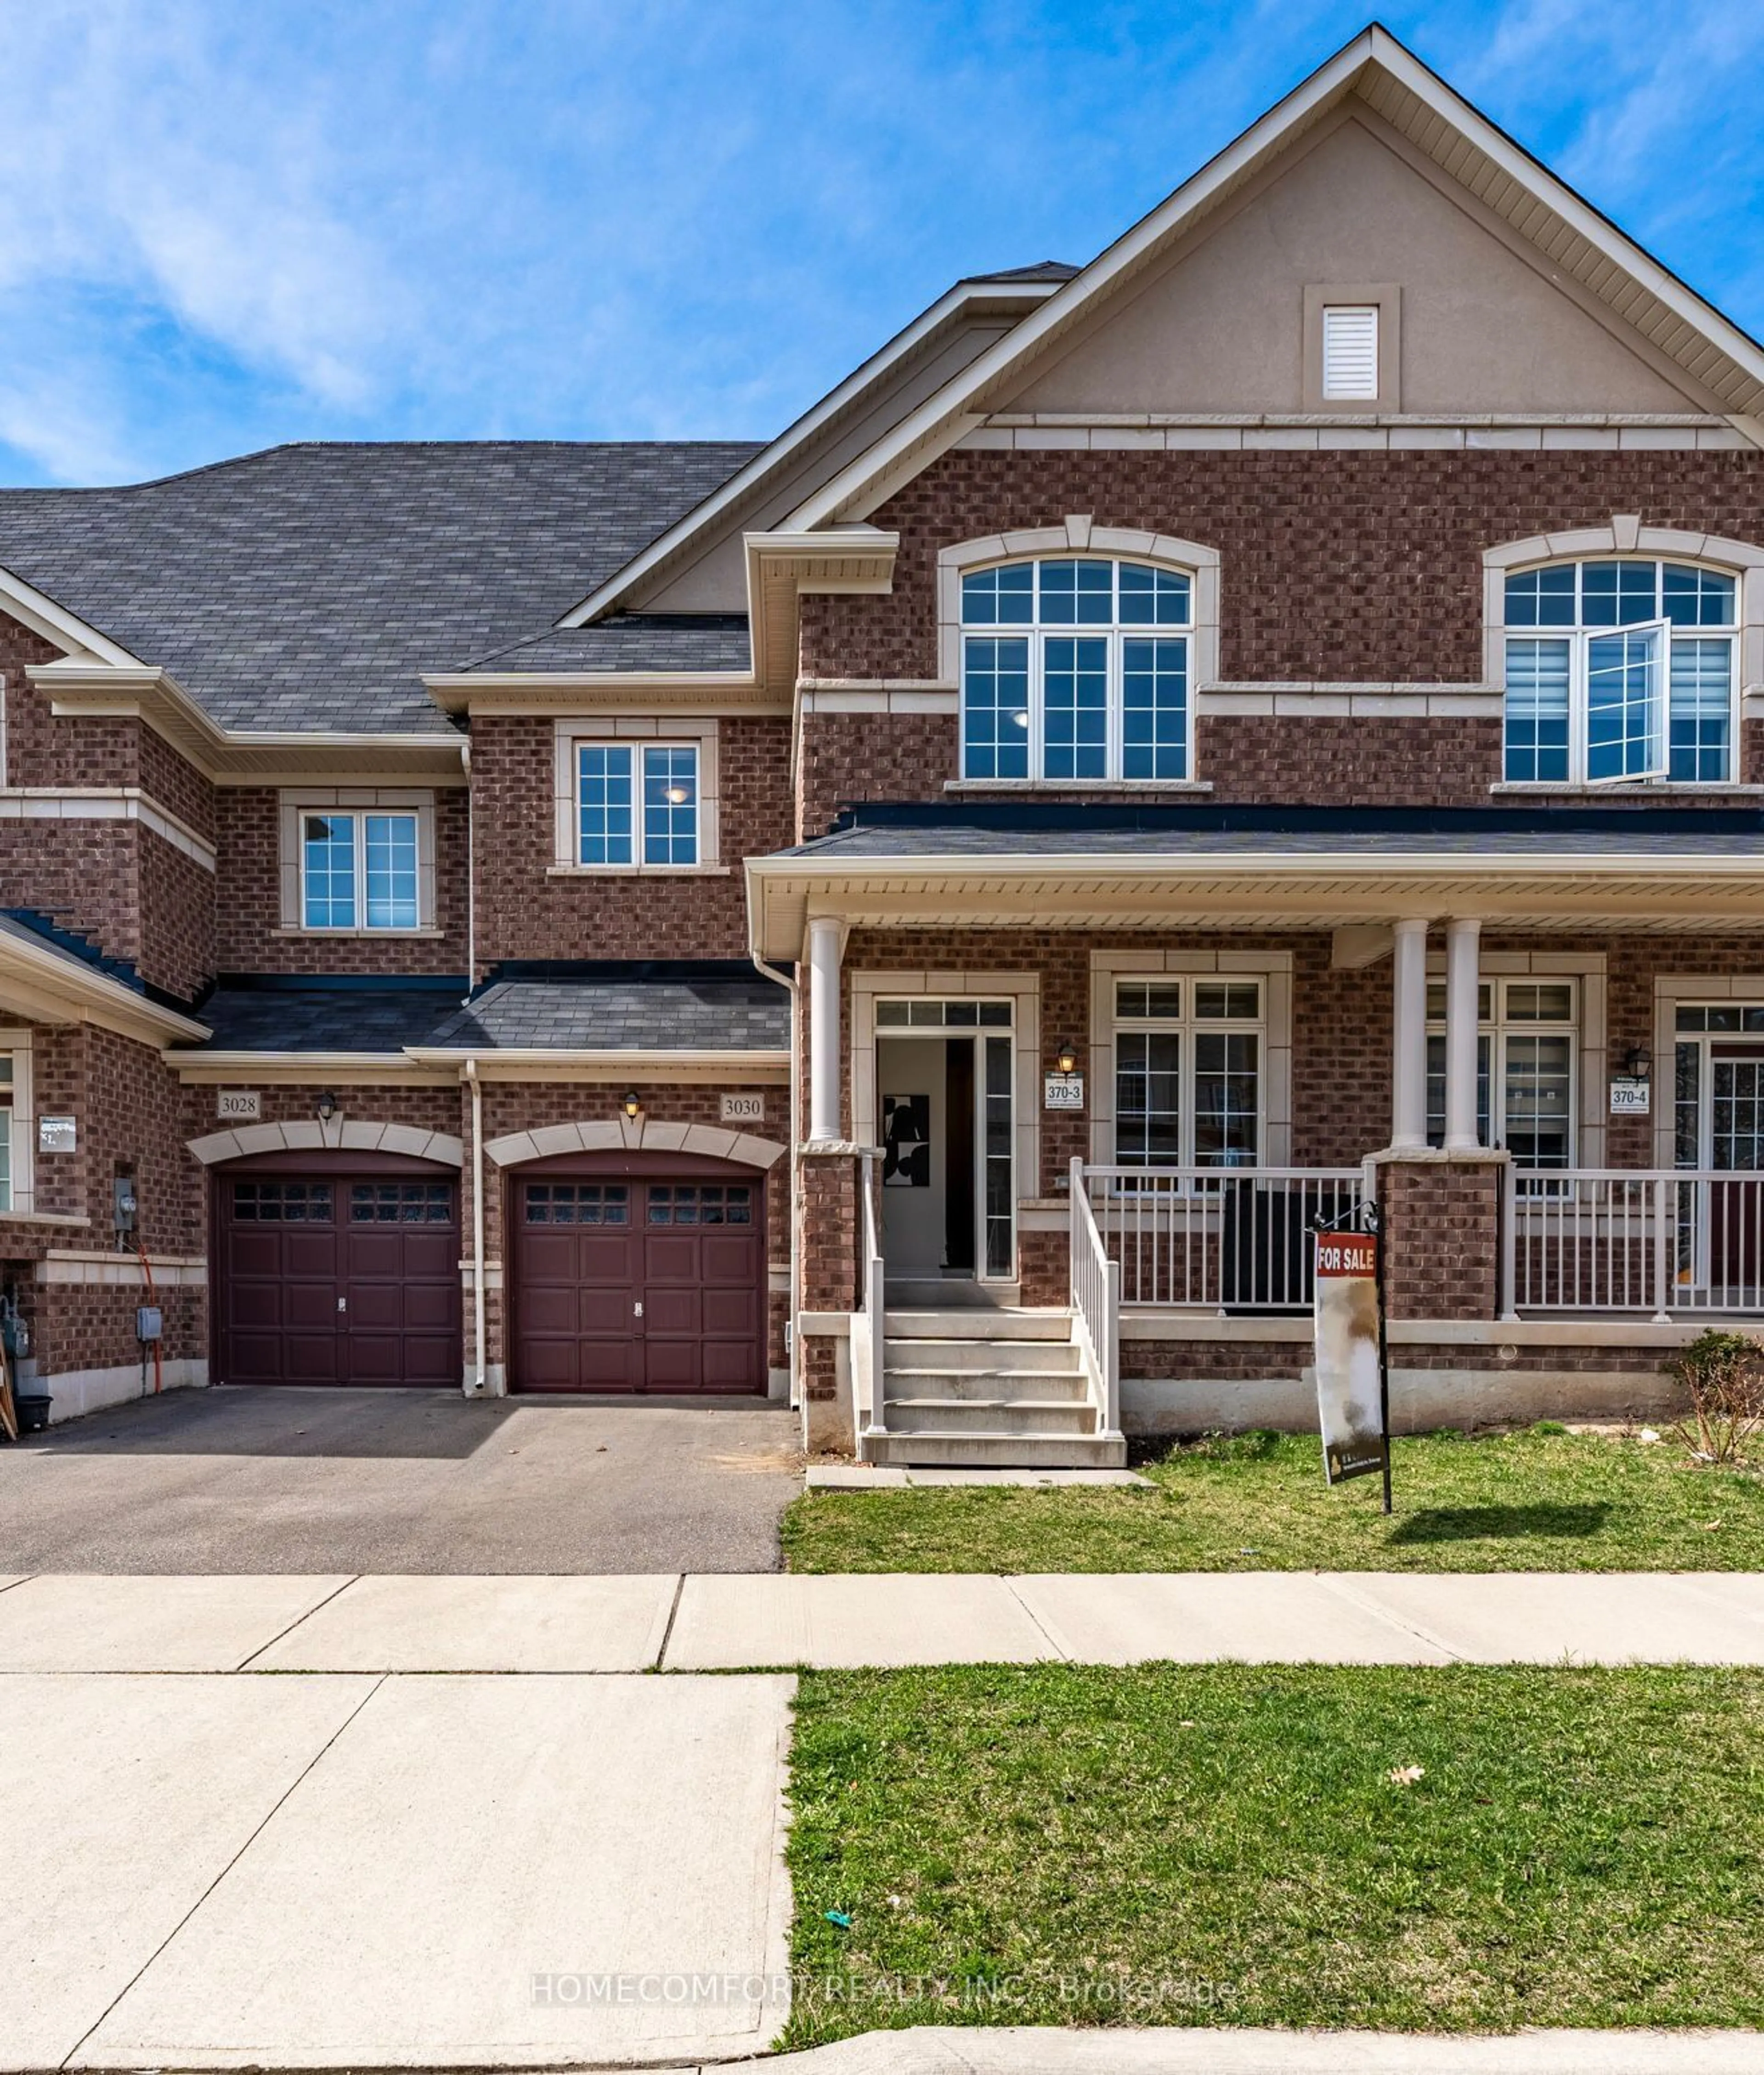 Home with brick exterior material for 3030 Max Khan Blvd, Oakville Ontario L6H 0S3